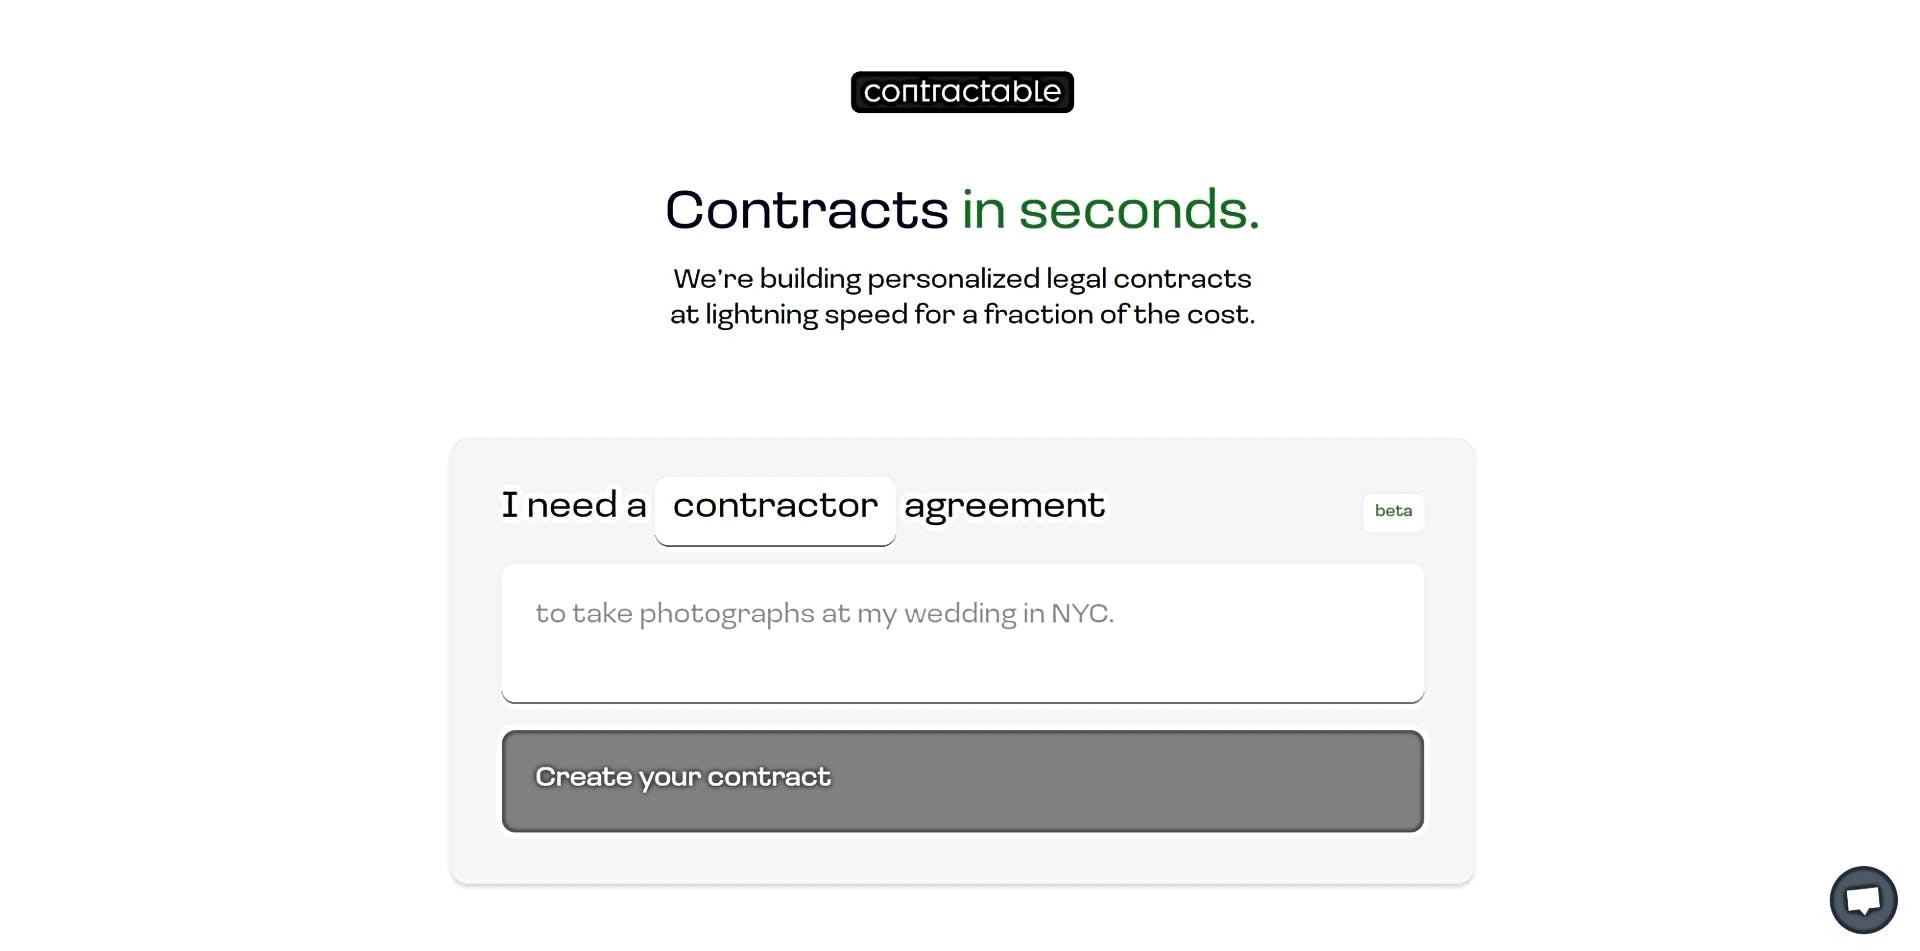 Contractable featured